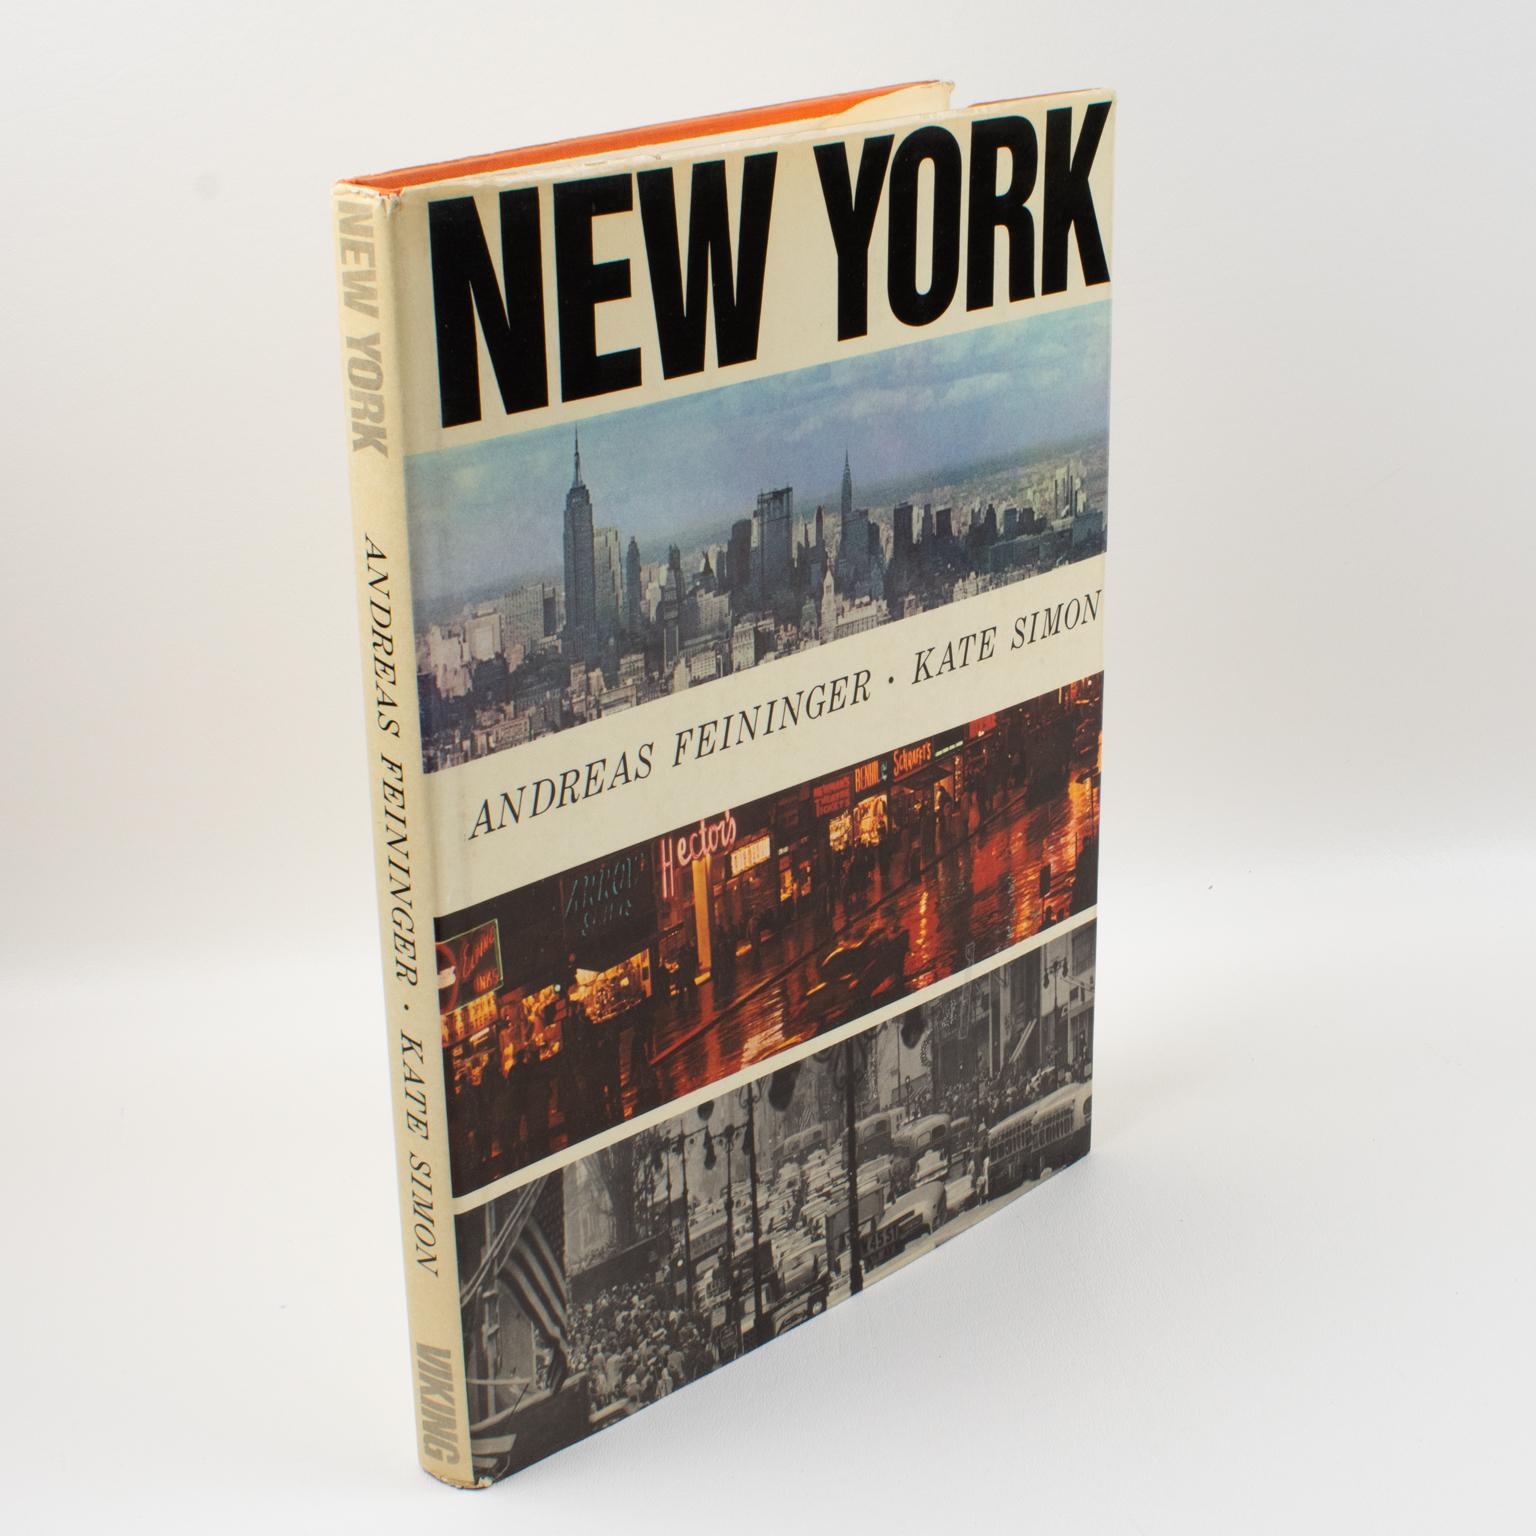 New York Photographs, Book by Andreas Feininger, 1964.
This is a stunning photographic document of its time: A portrait of New York. Color and black and white photo-reproductions by Andreas Feininger (1906-1999), an American photographer and a